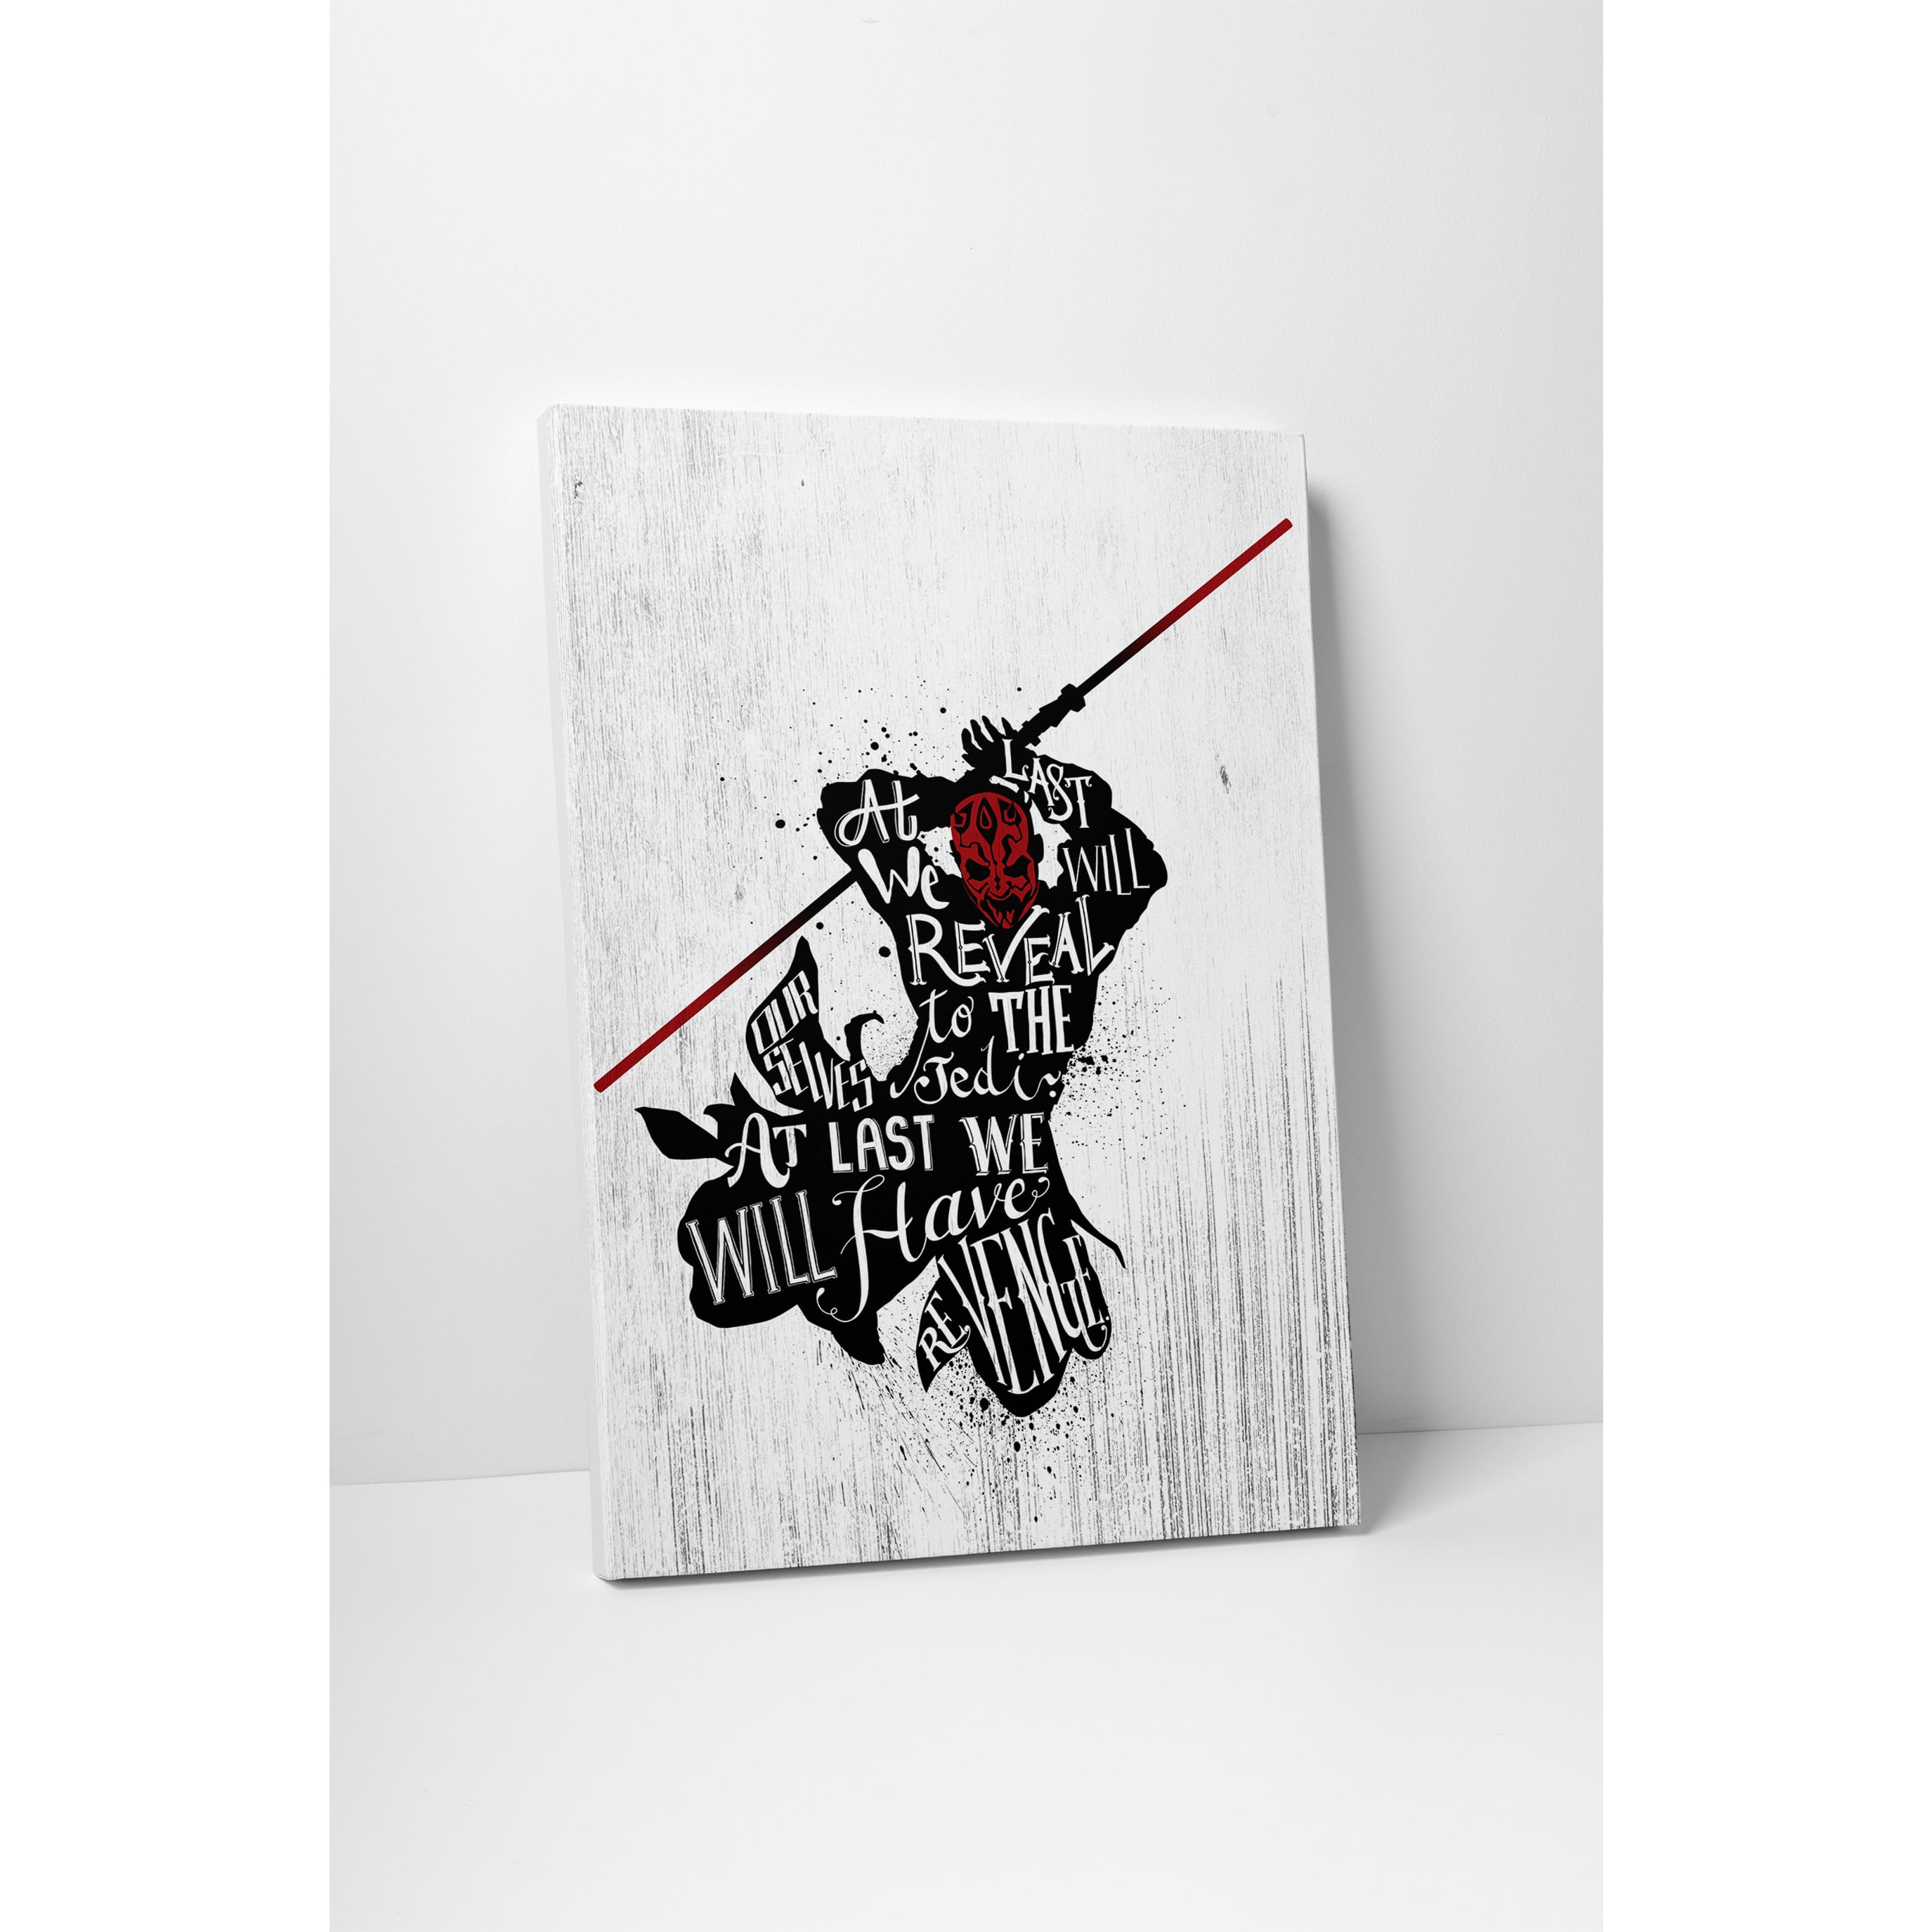 Darth Maul Star Wars Character Printed Canvas Picture 16"x12" 